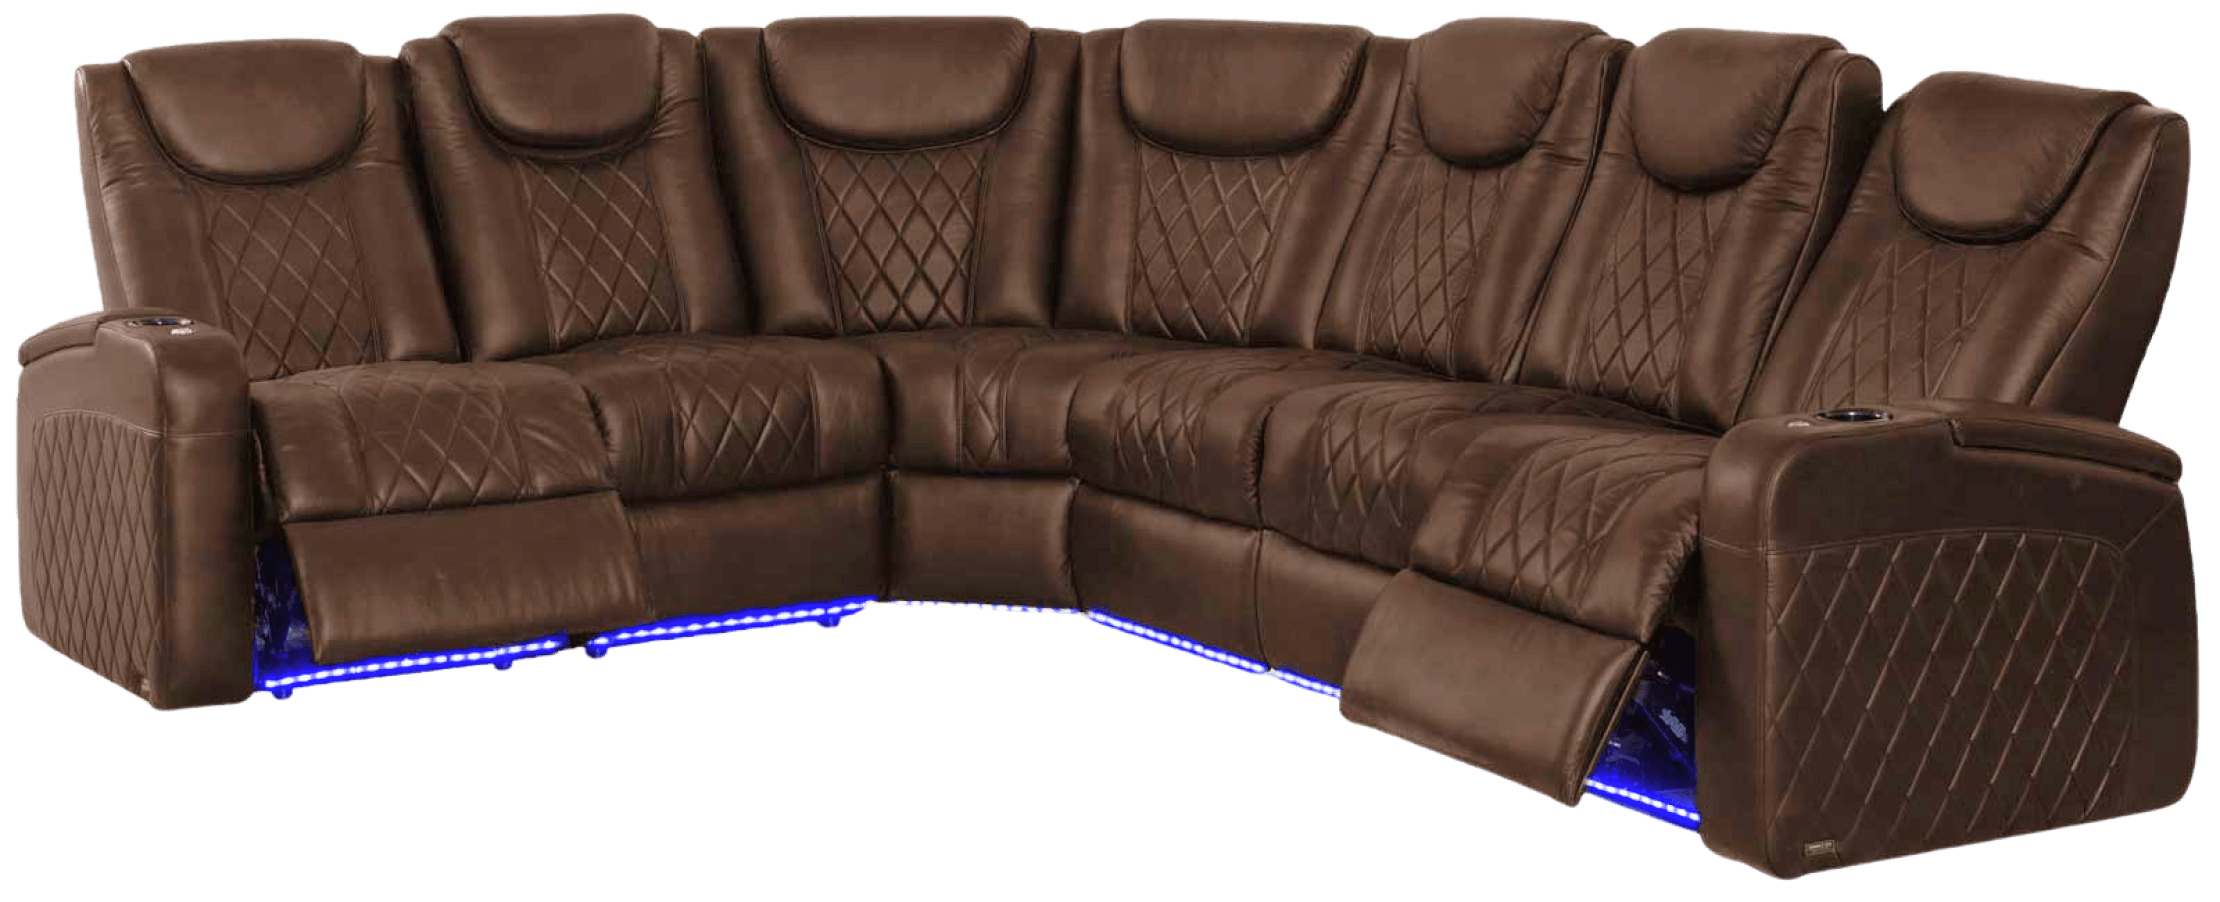 L-shaped sectional sofas